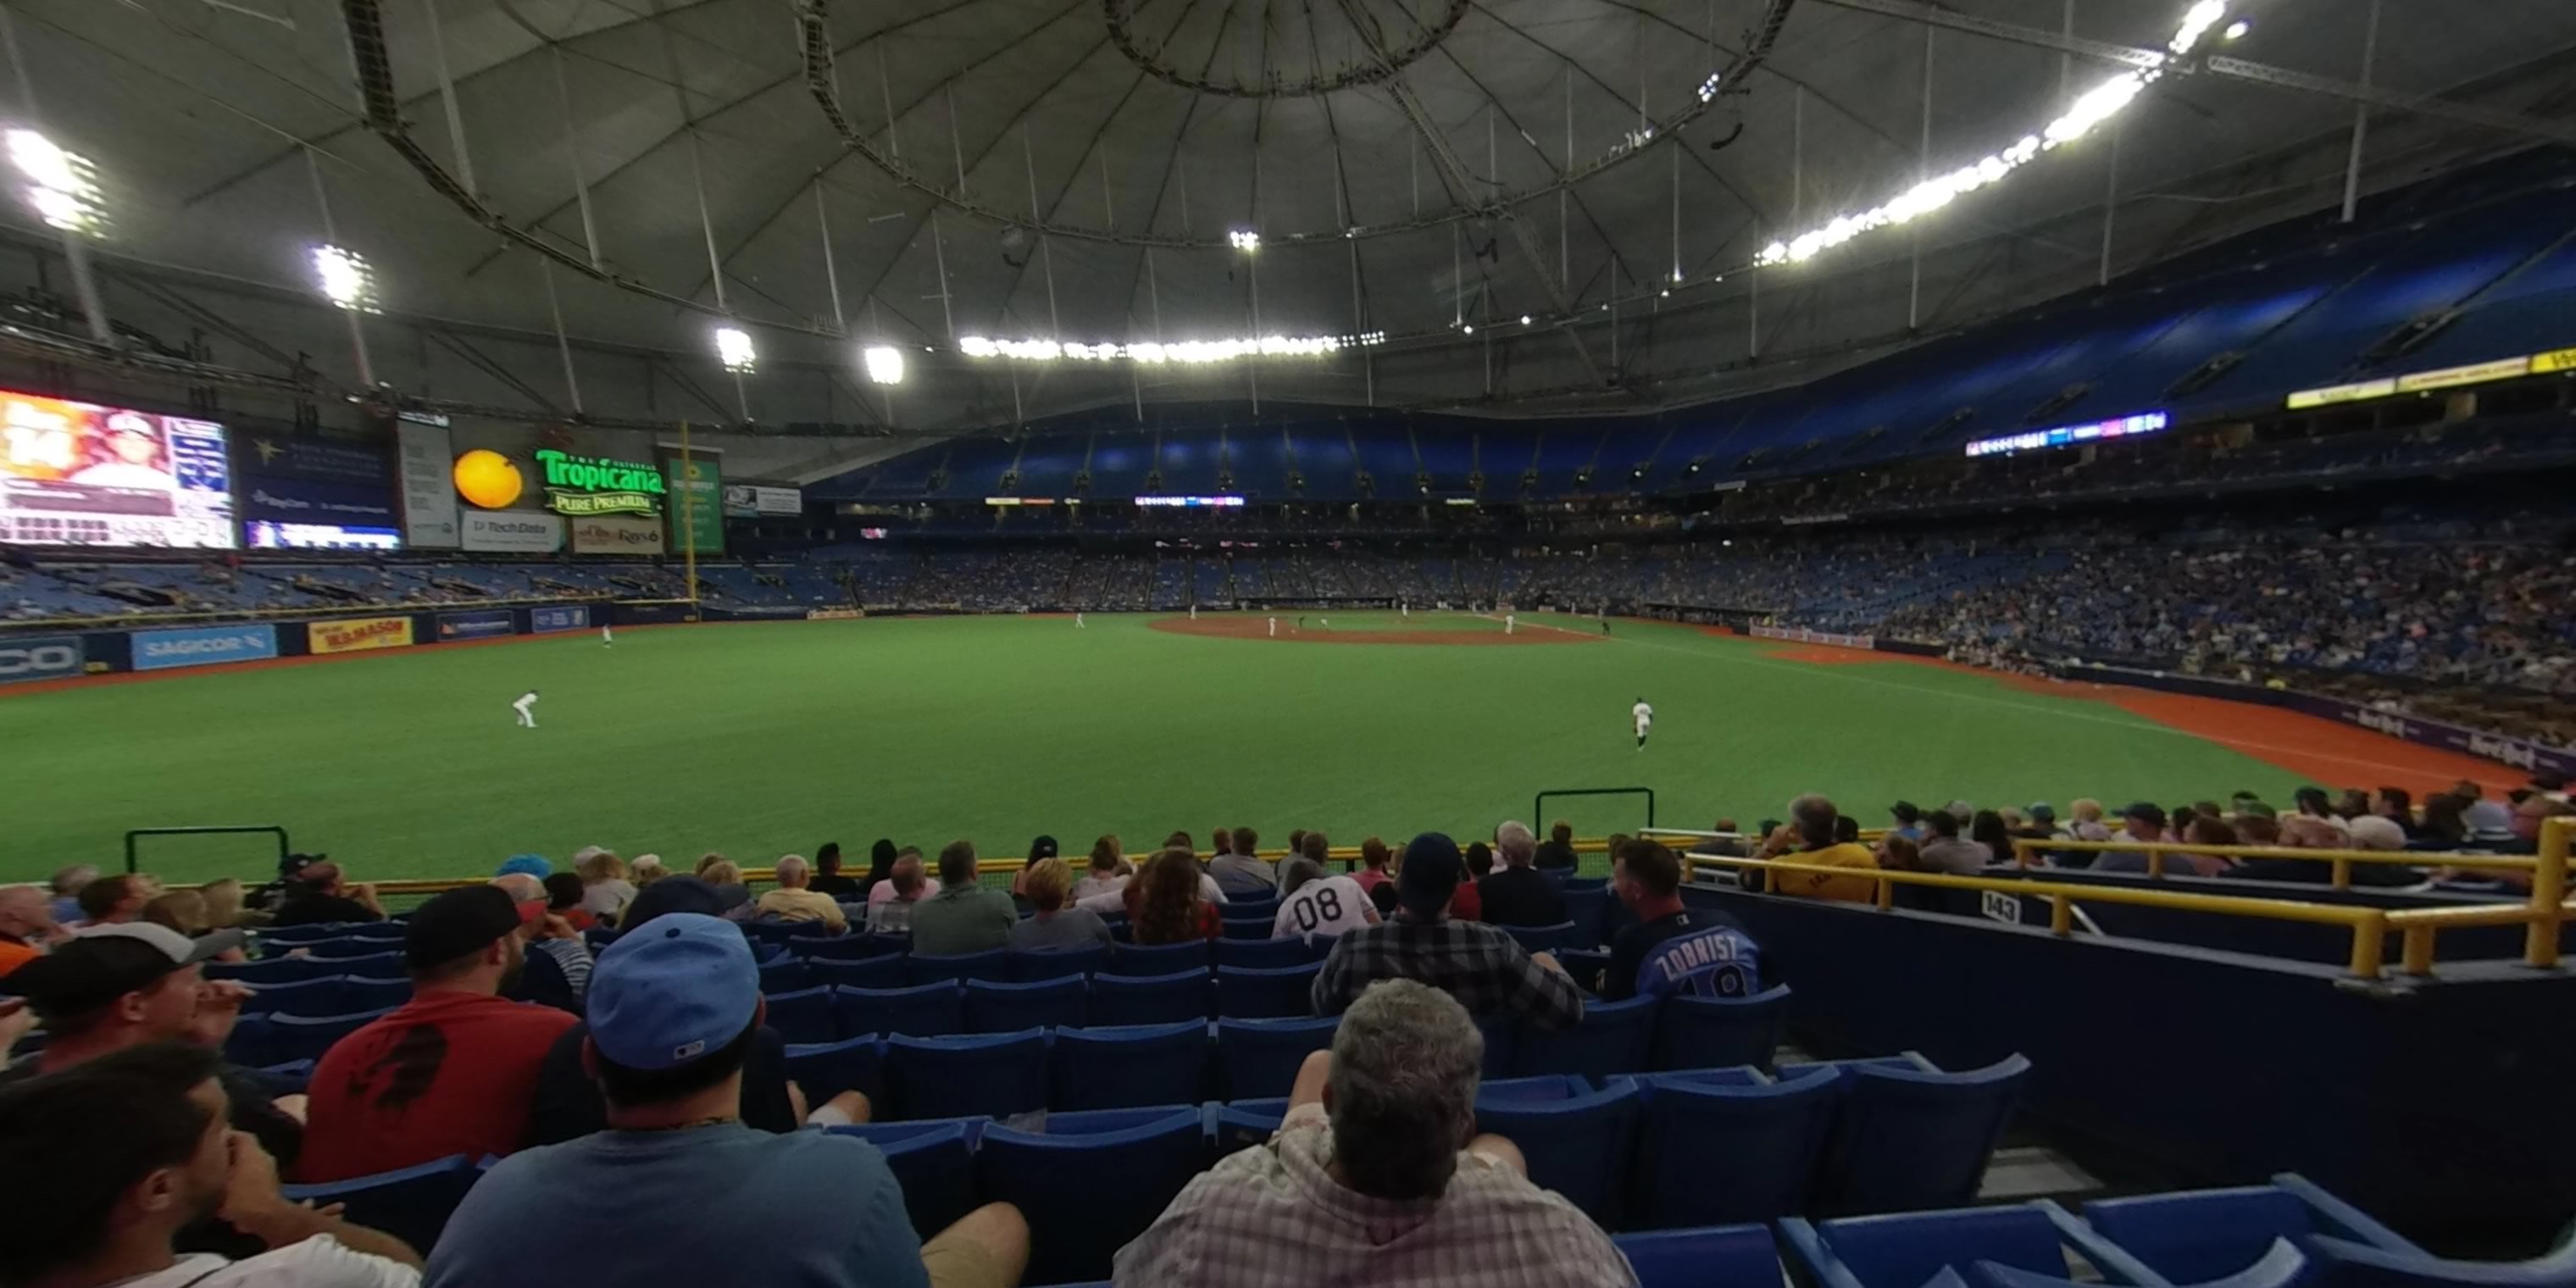 section 145 panoramic seat view  for baseball - tropicana field